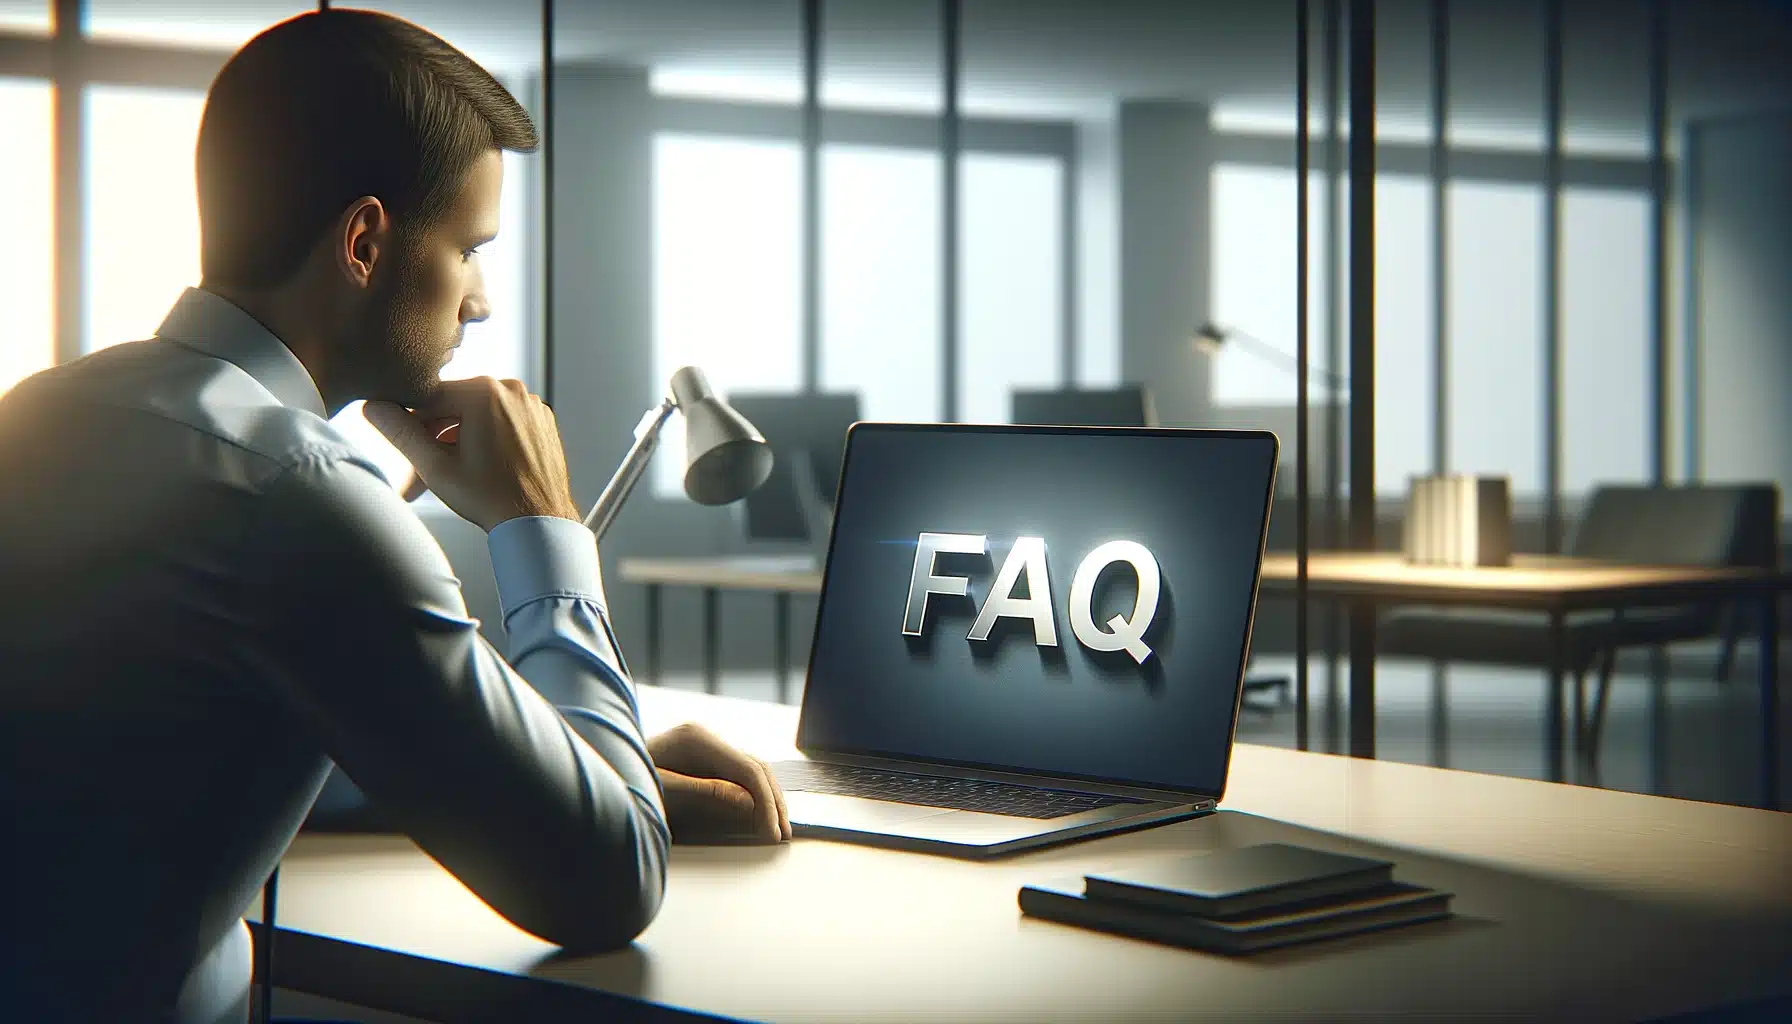 Professional reviewing 'FAQ' on a laptop in a minimalist office setting